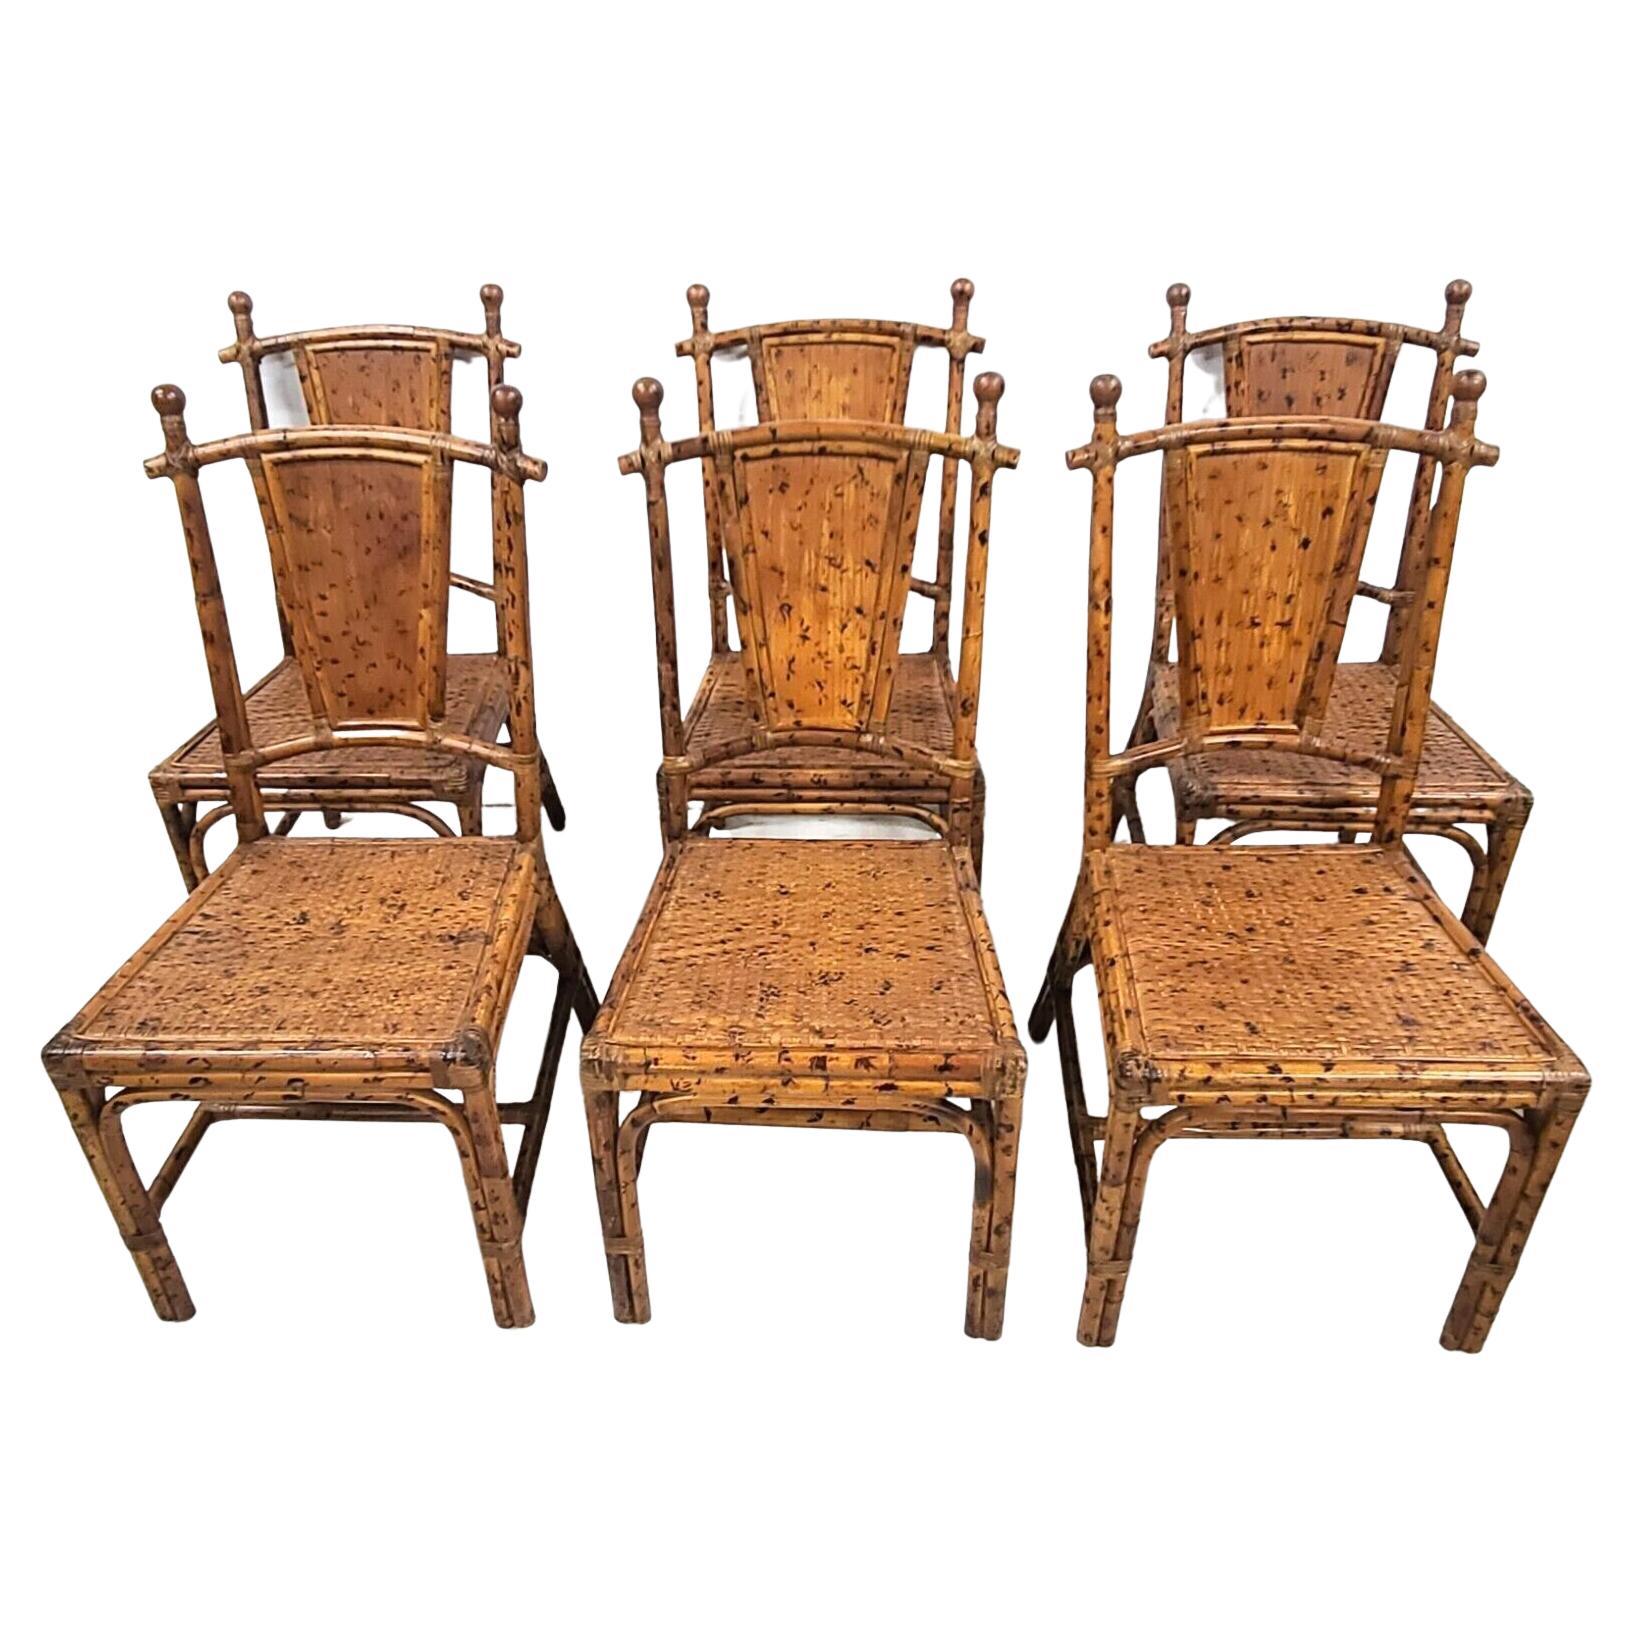 Vintage French Style Tortoise Bamboo Rattan Wicker Dining Chairs, Set of 6